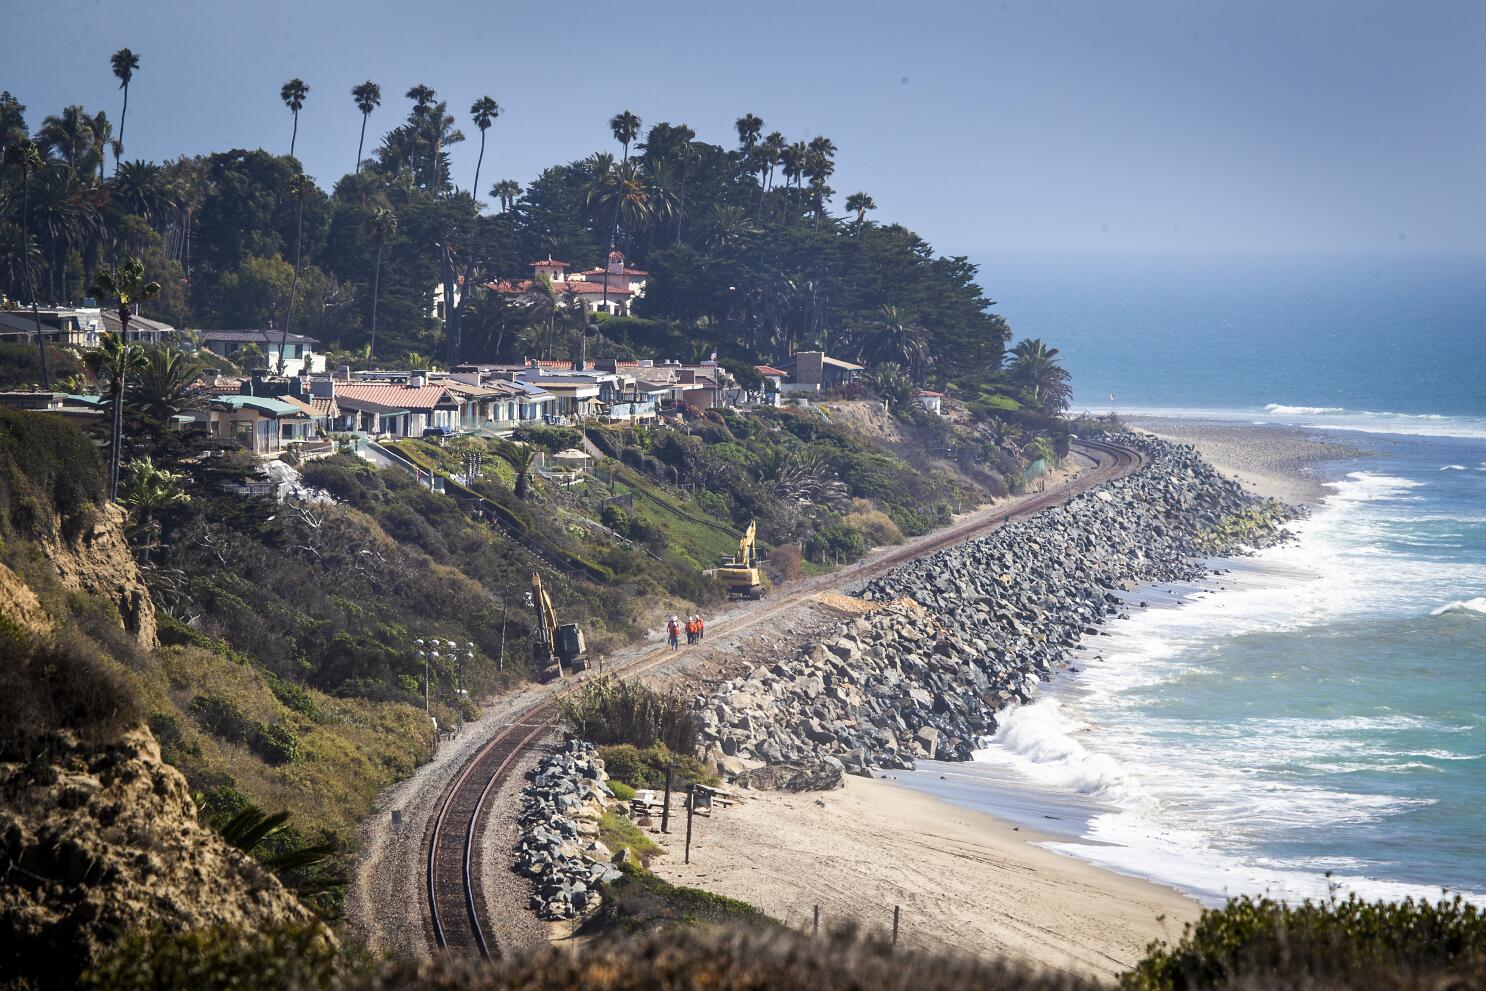 Coastal erosion in San Clemente threatens railroad tracks, pricey homes - Los Angeles Times